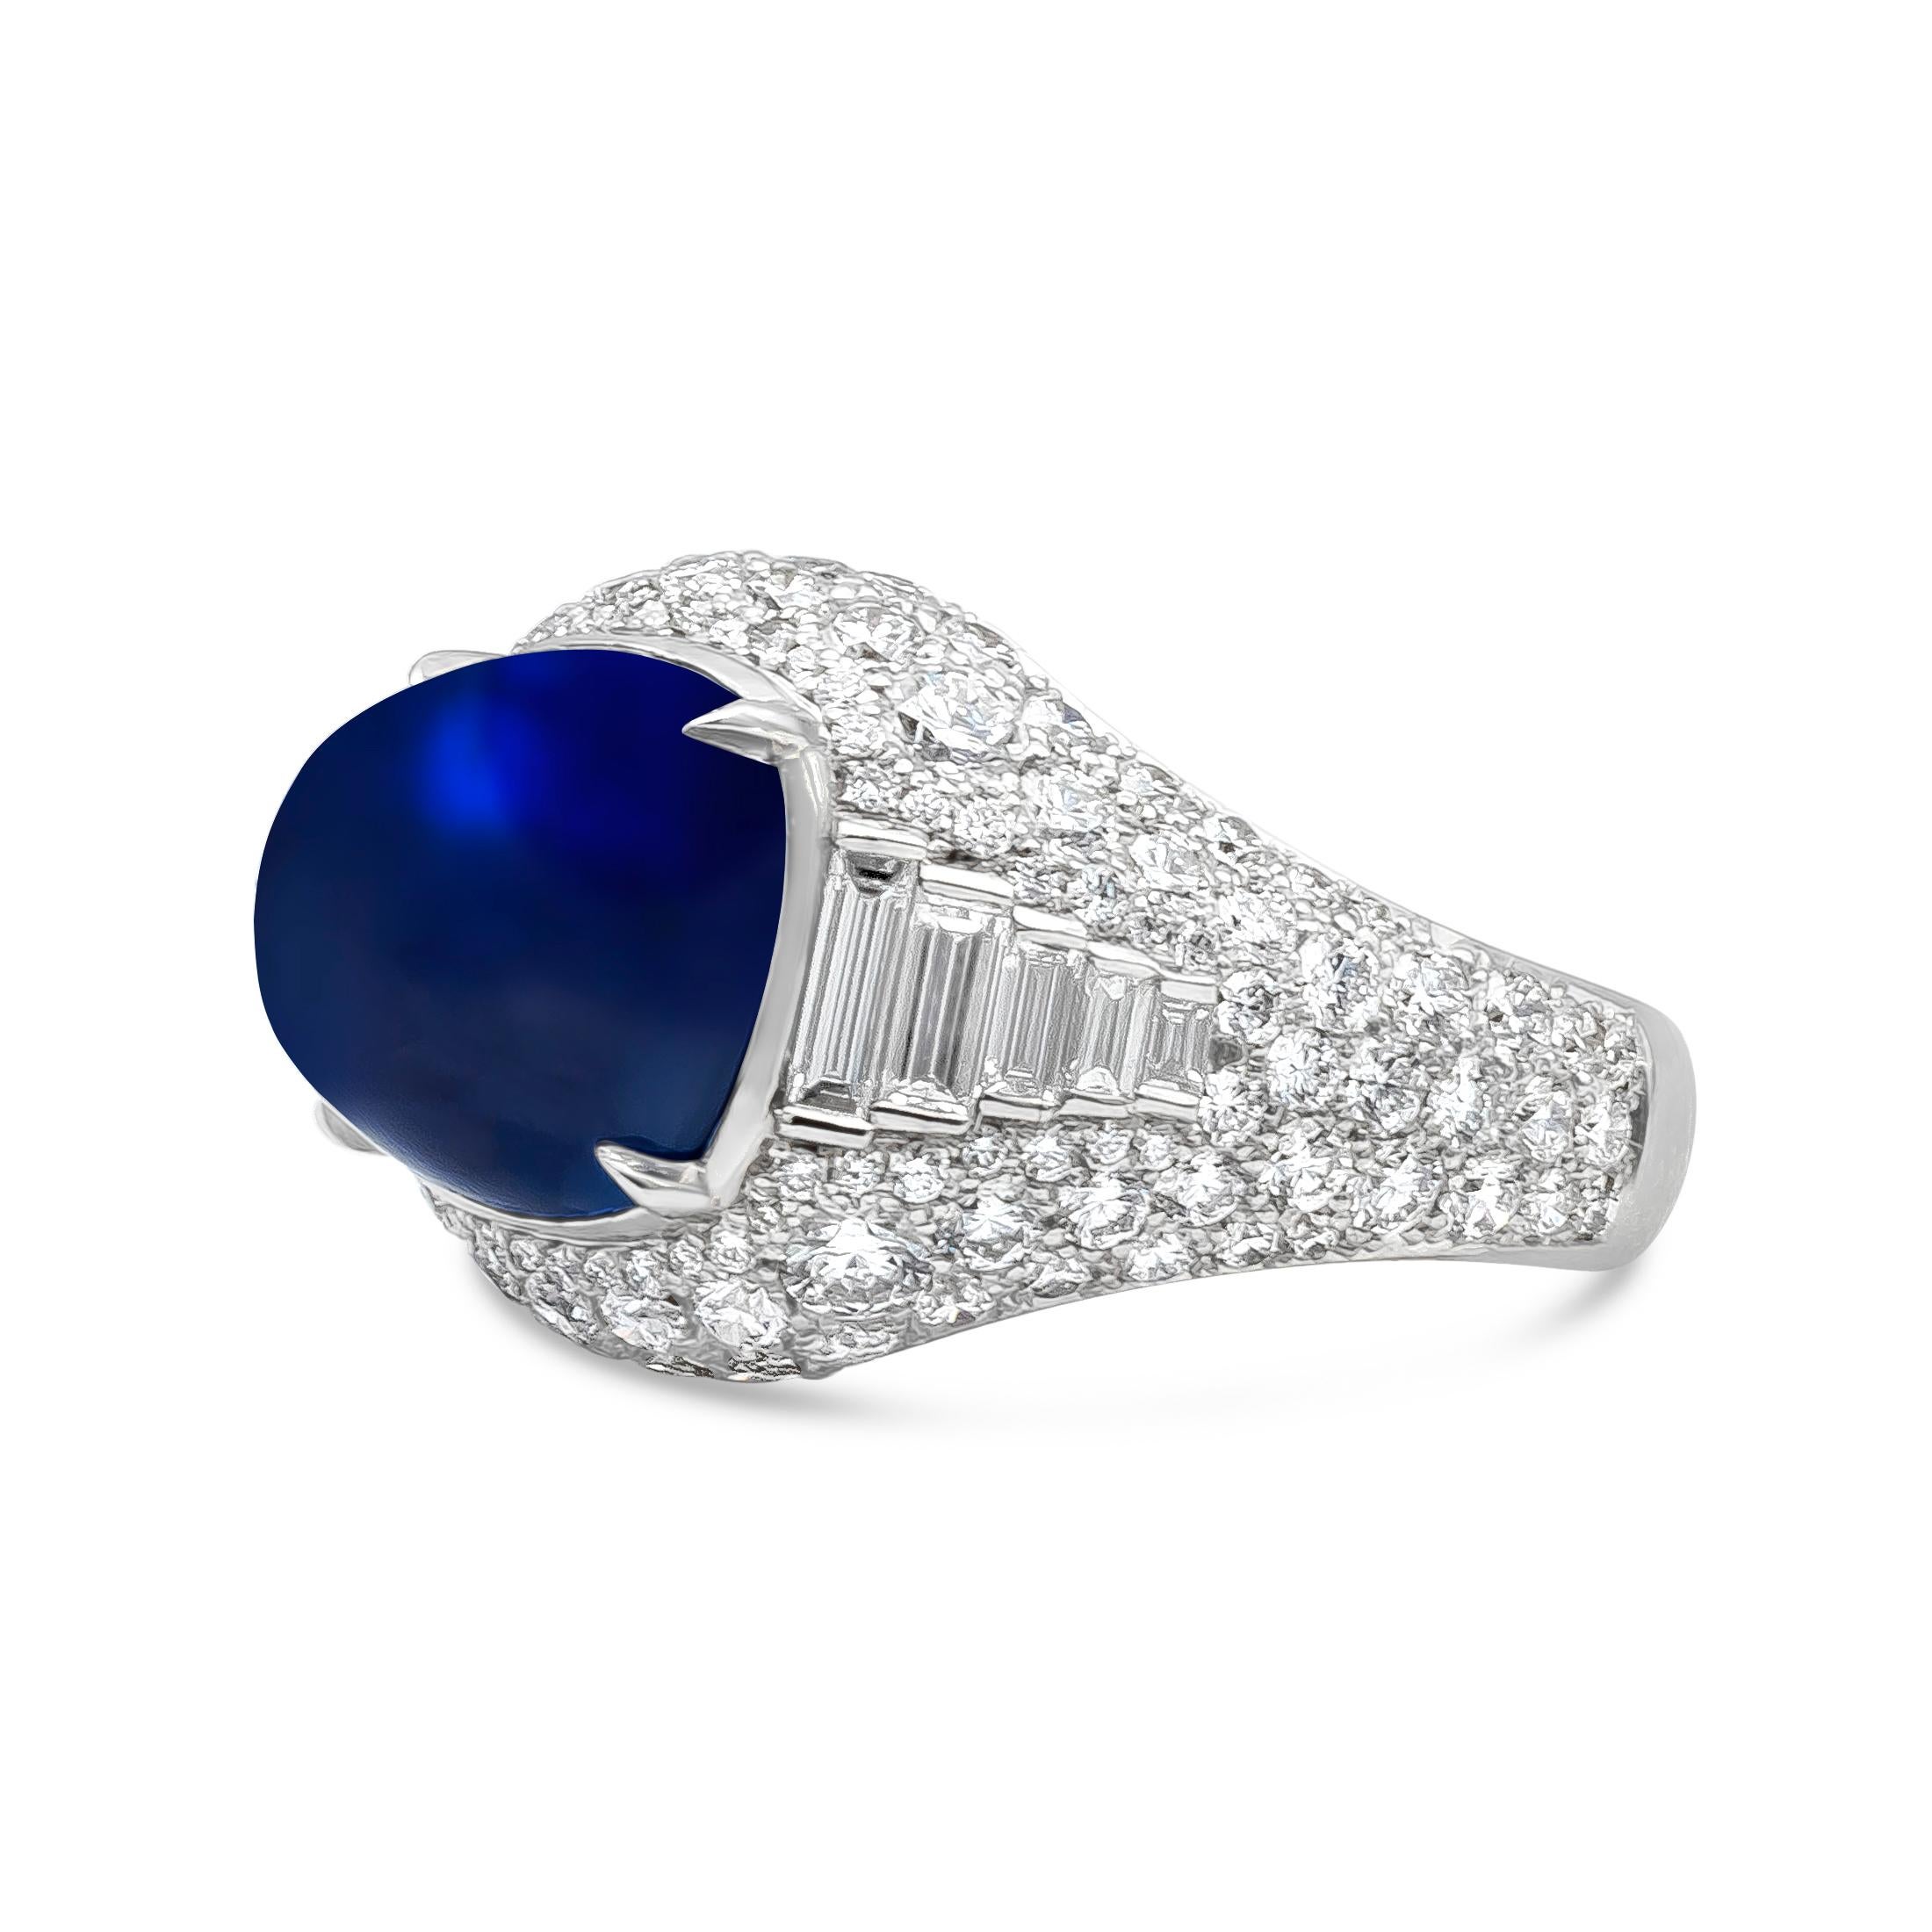 This well crafted and stylish high end ring showcasing a rare and vibrant 8.42 carat Kashmir cabochon Sapphire in the center, surrounded by baguette and brilliant round diamonds. Finely Made with polished Platinum.